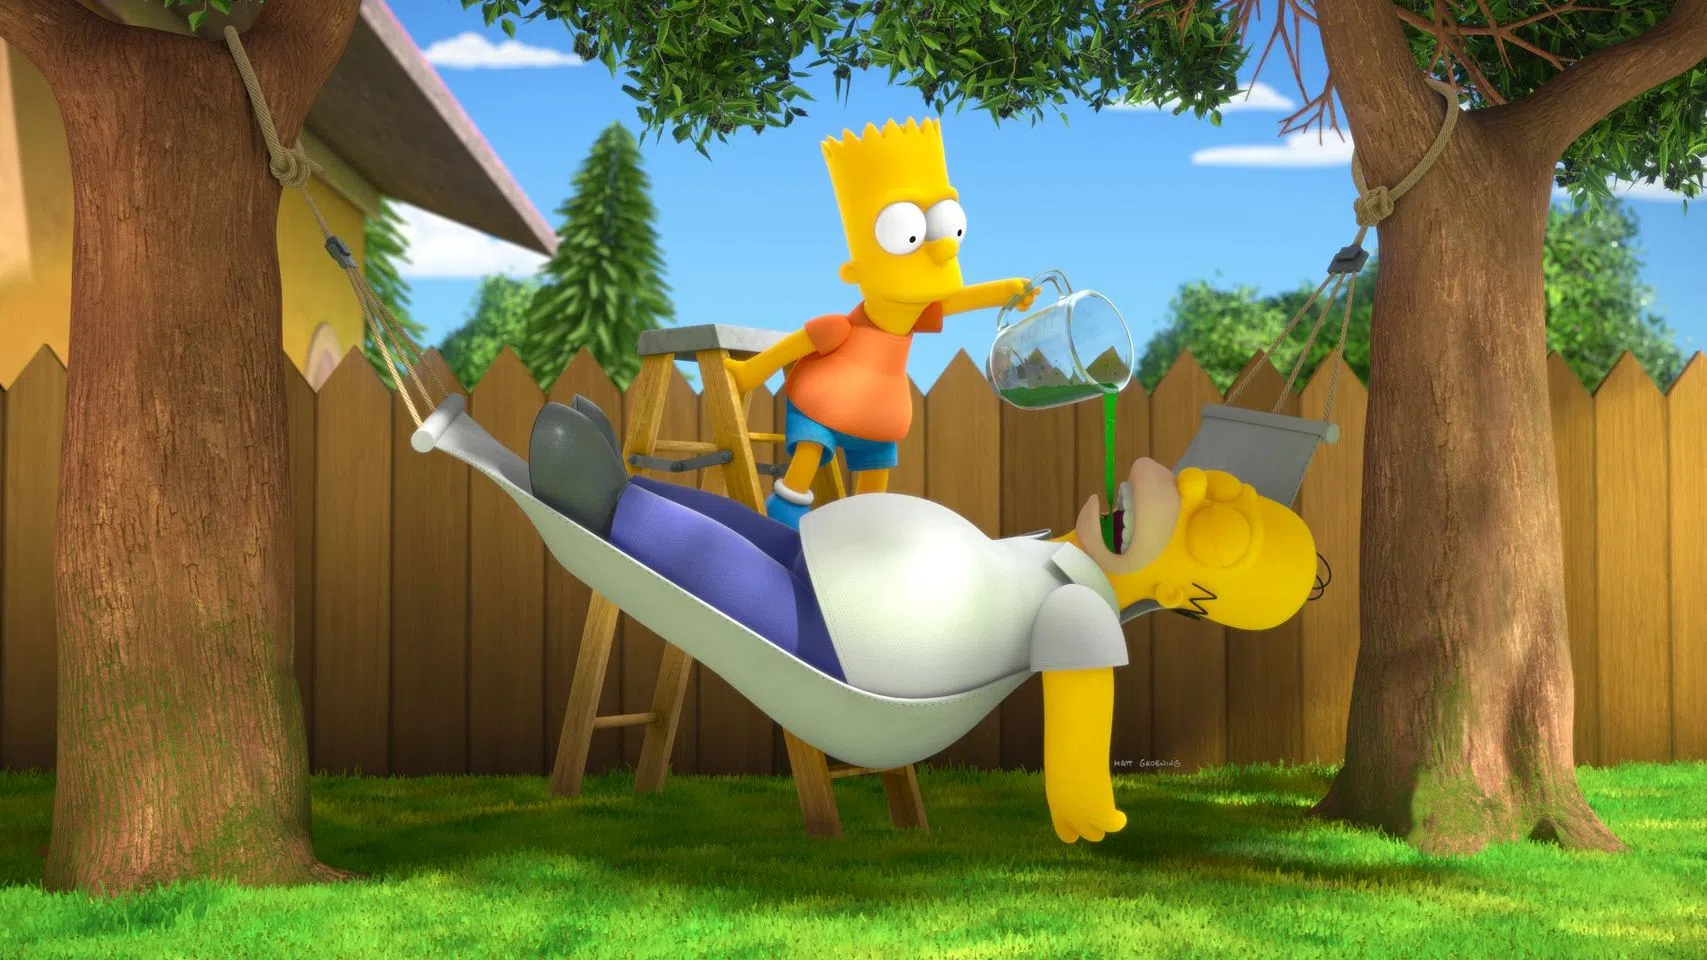 Popular 'The Simpsons' Tradition Postponed